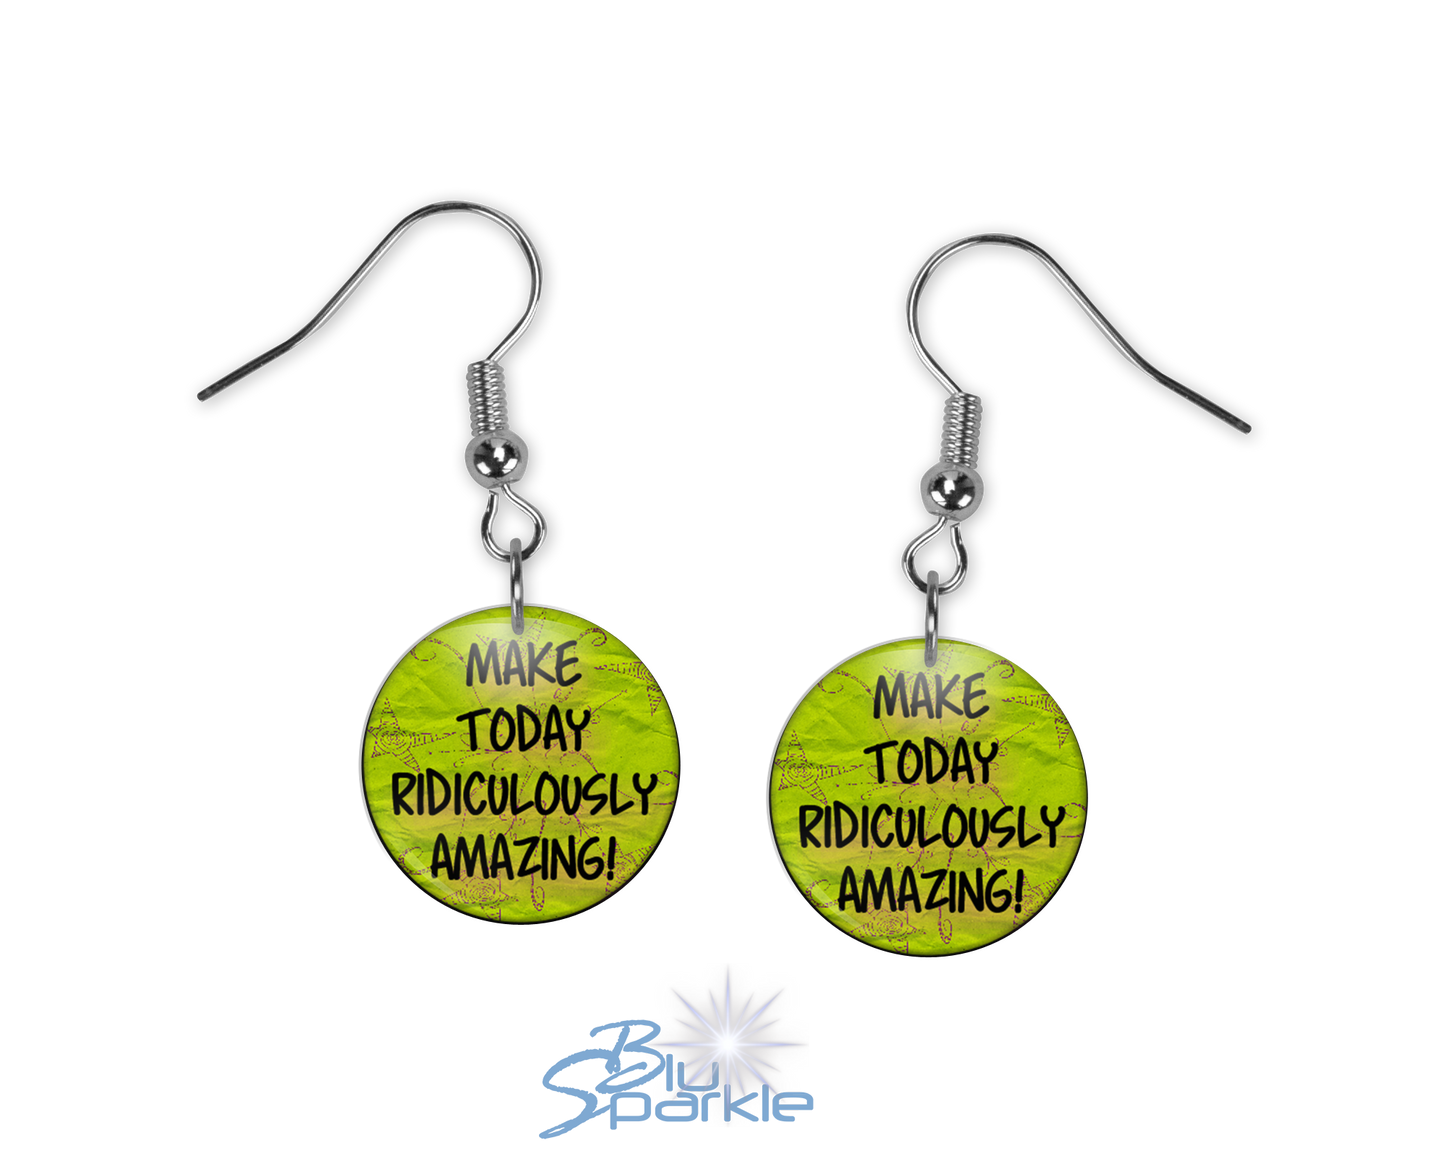 Make Today Ridiculously Amazing! - Earrings